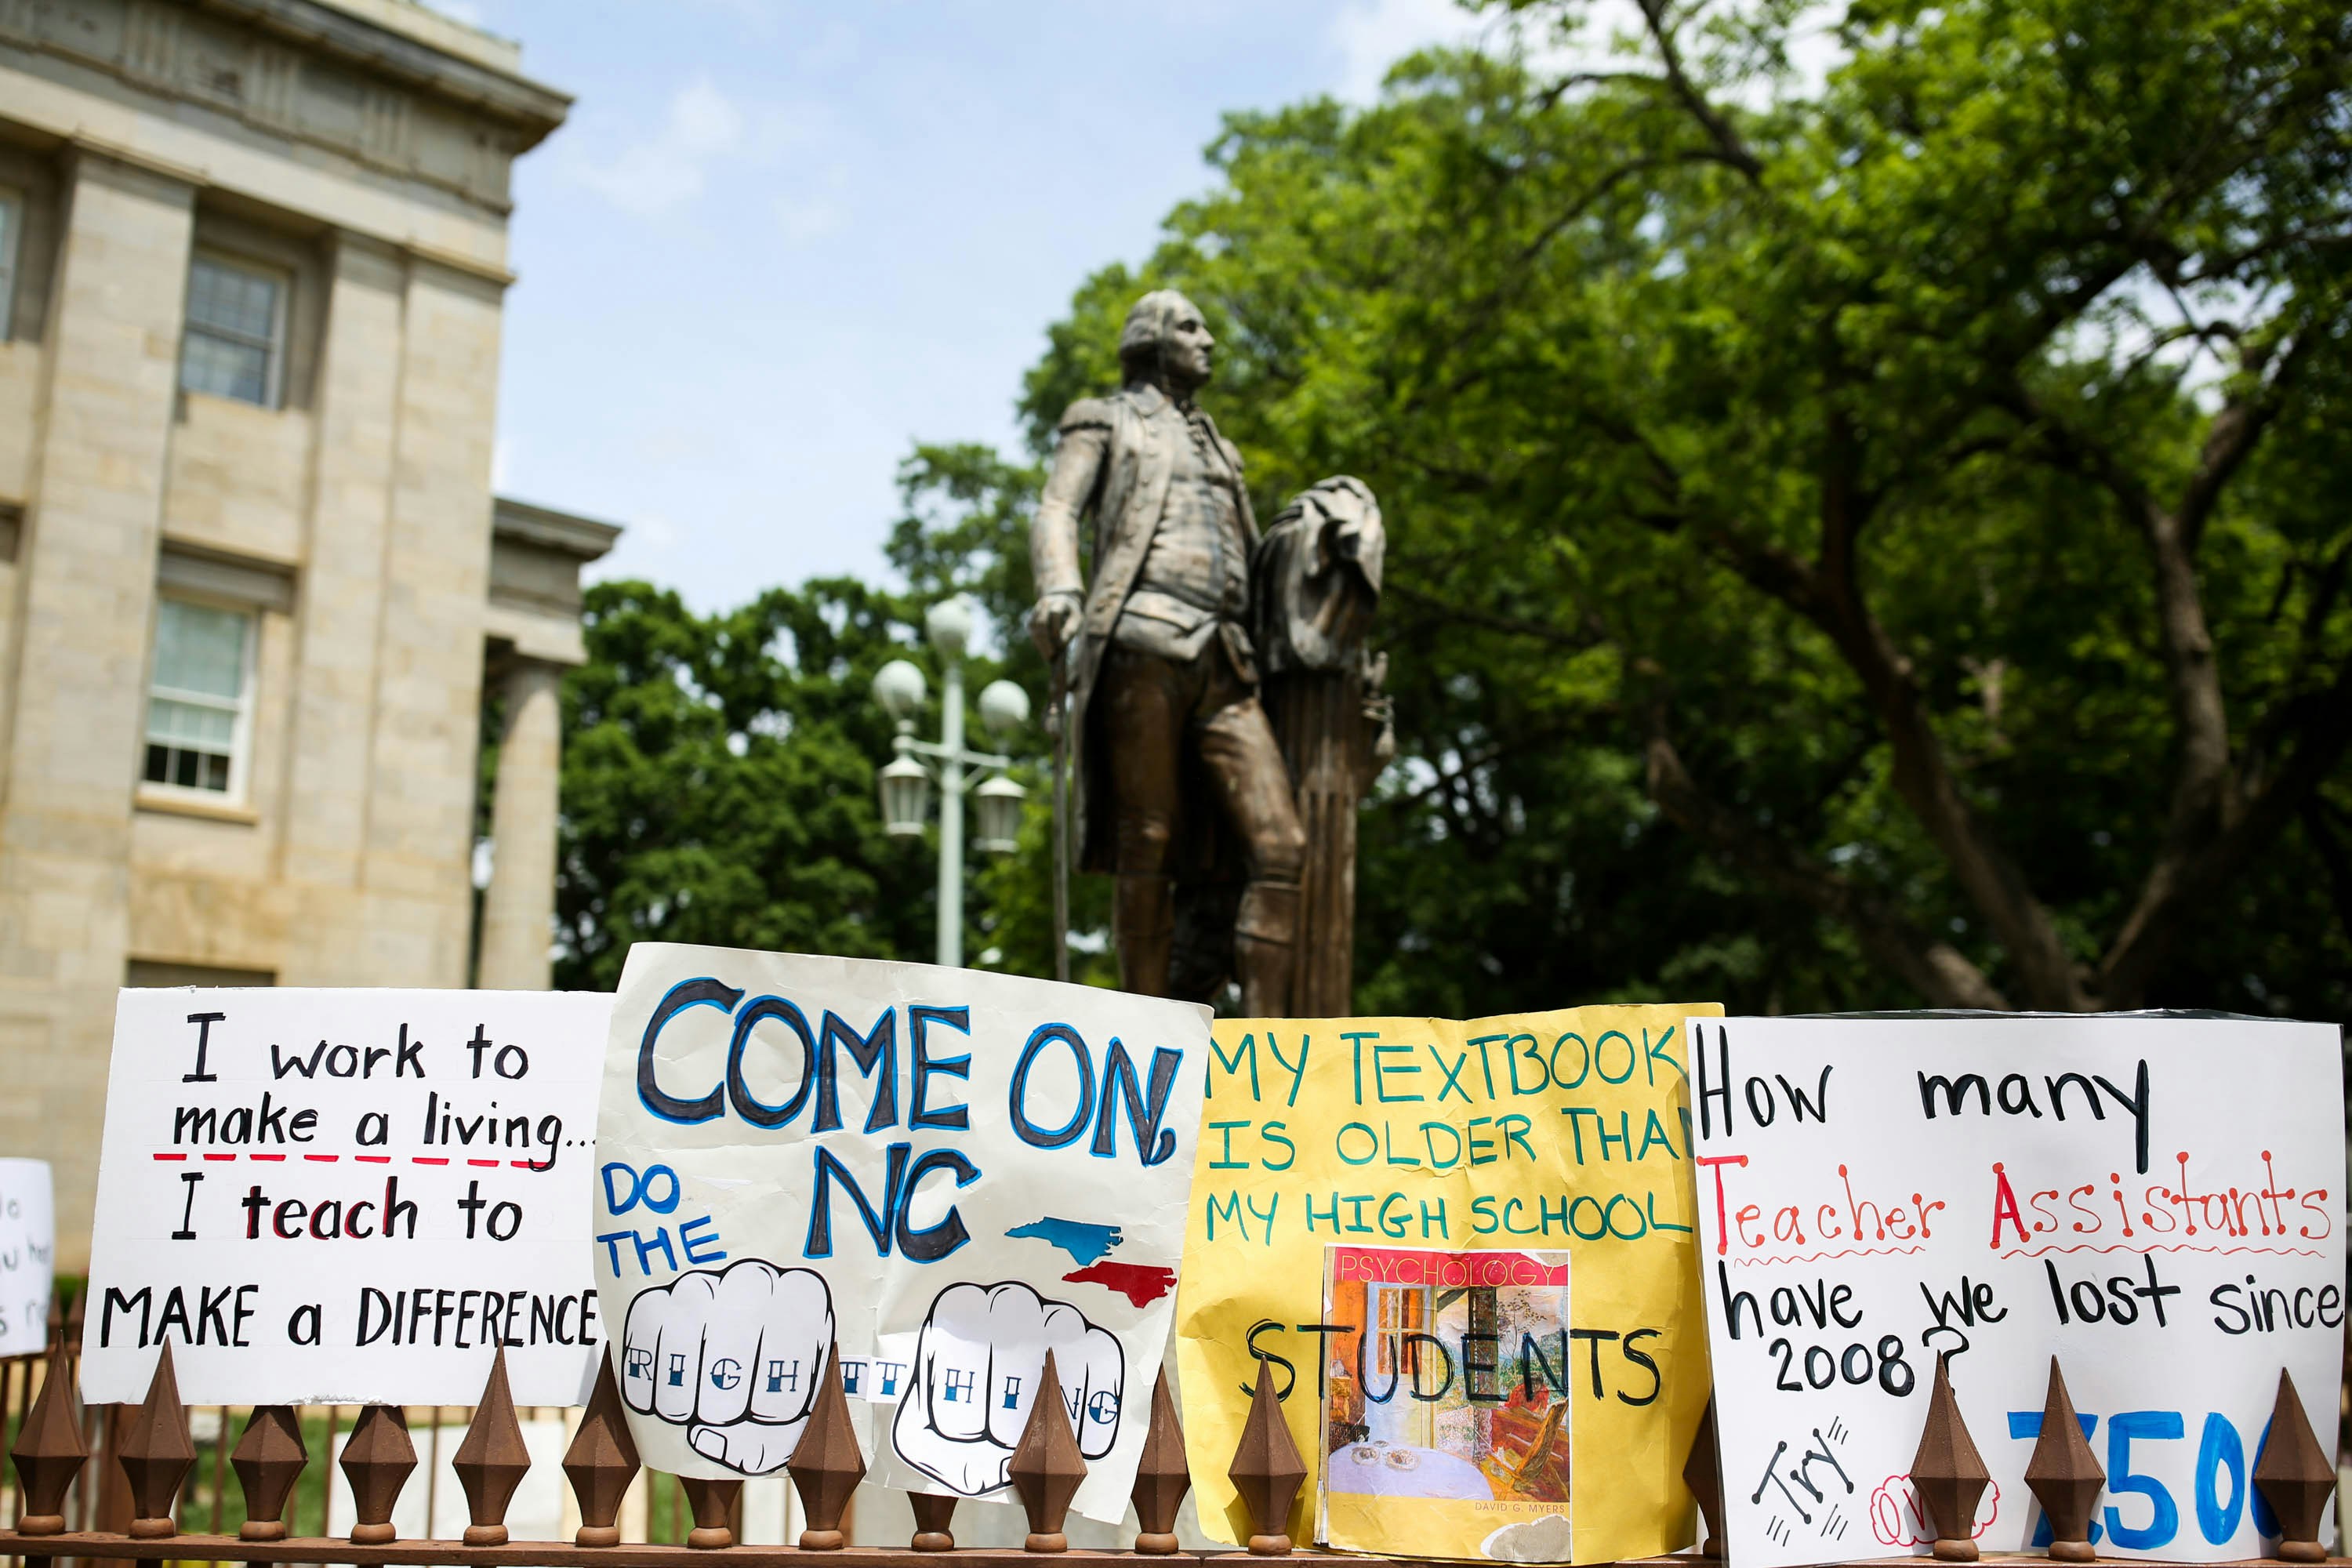 Teachers placed protest signs around a statue of George Washington outside the state capitol building in Raleigh, North Carolina on May, 16 2018. - Tens of thousands of educators, school workers and parents of students marched from the North Carolina Association of Educators building to the State Capitol building to protest wages and per-pupil spending, among other issues. North Carolina ranked 39th in teacher pay last year, according to the National Education Association. Though wages have increased slightly, many educators still believe not enough is being done by state legislature in regards to education funding. (Photo by Logan Cyrus / AFP)        (Photo credit should read LOGAN CYRUS/AFP/Getty Images)